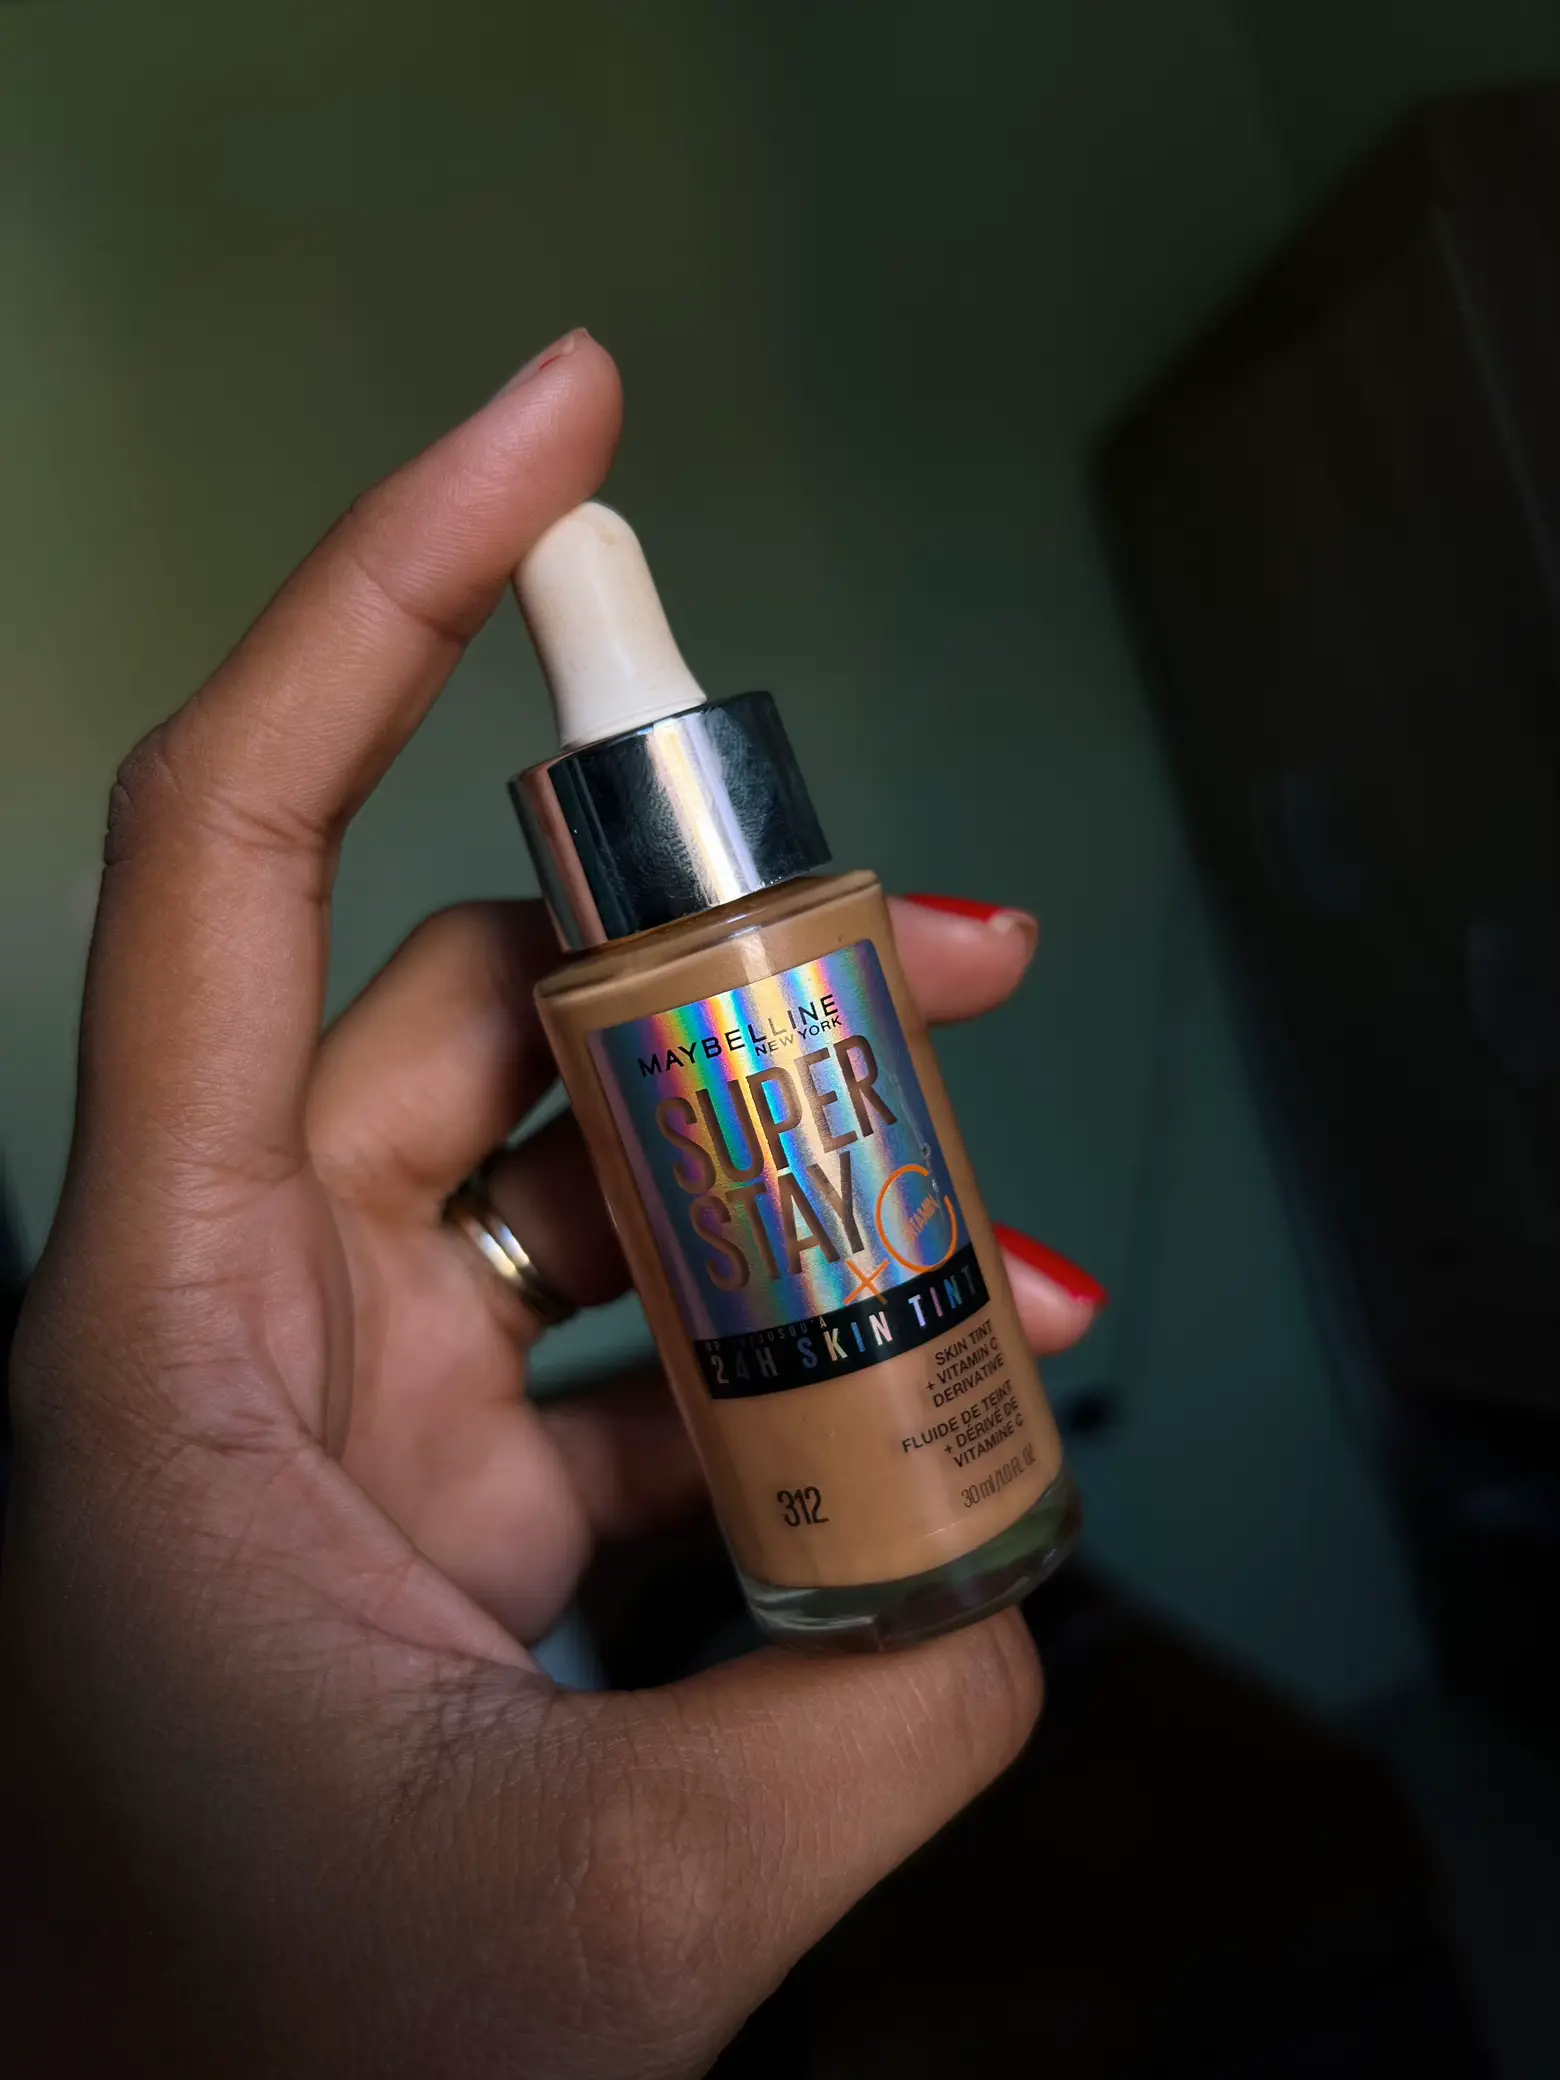 Try-on of the new Maybelline SuperStay 24H Skin tint + Vitamin C🍊✨ De, skin tint